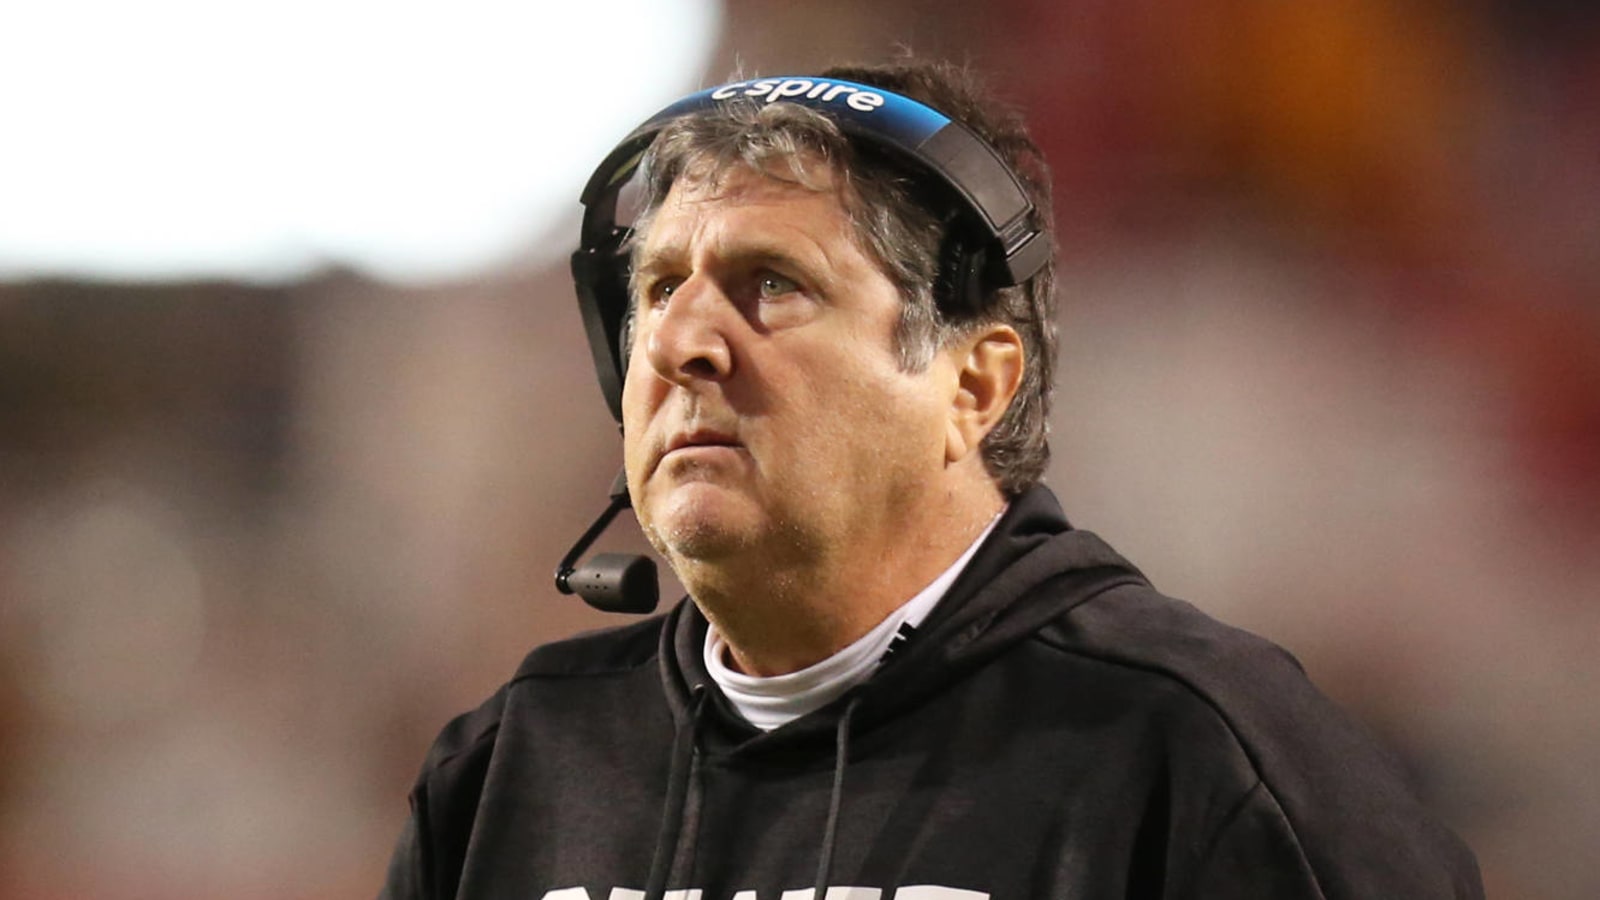 Mike Leach throws his kickers under the bus after blowing game